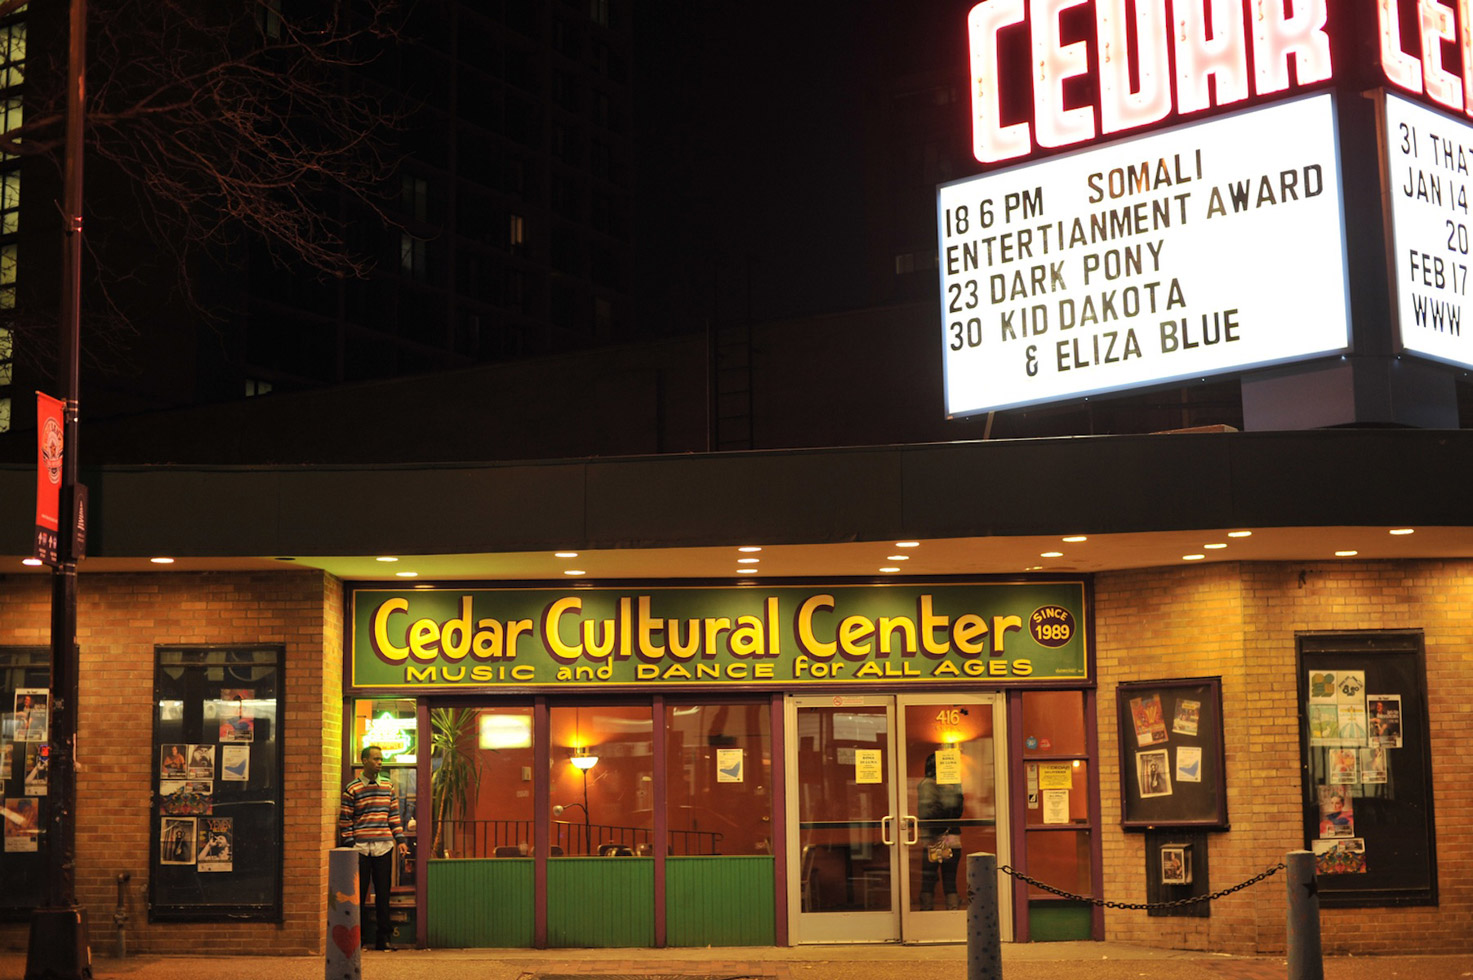 A young Somali man waits outside the Cedar Cultural Center, host of the 2011 Somali Entertainment Awards. Since Minneapolis has one of the largest collective communities in the diaspora, famous artists, athletes, and musicians came from around the world to collect their awards.